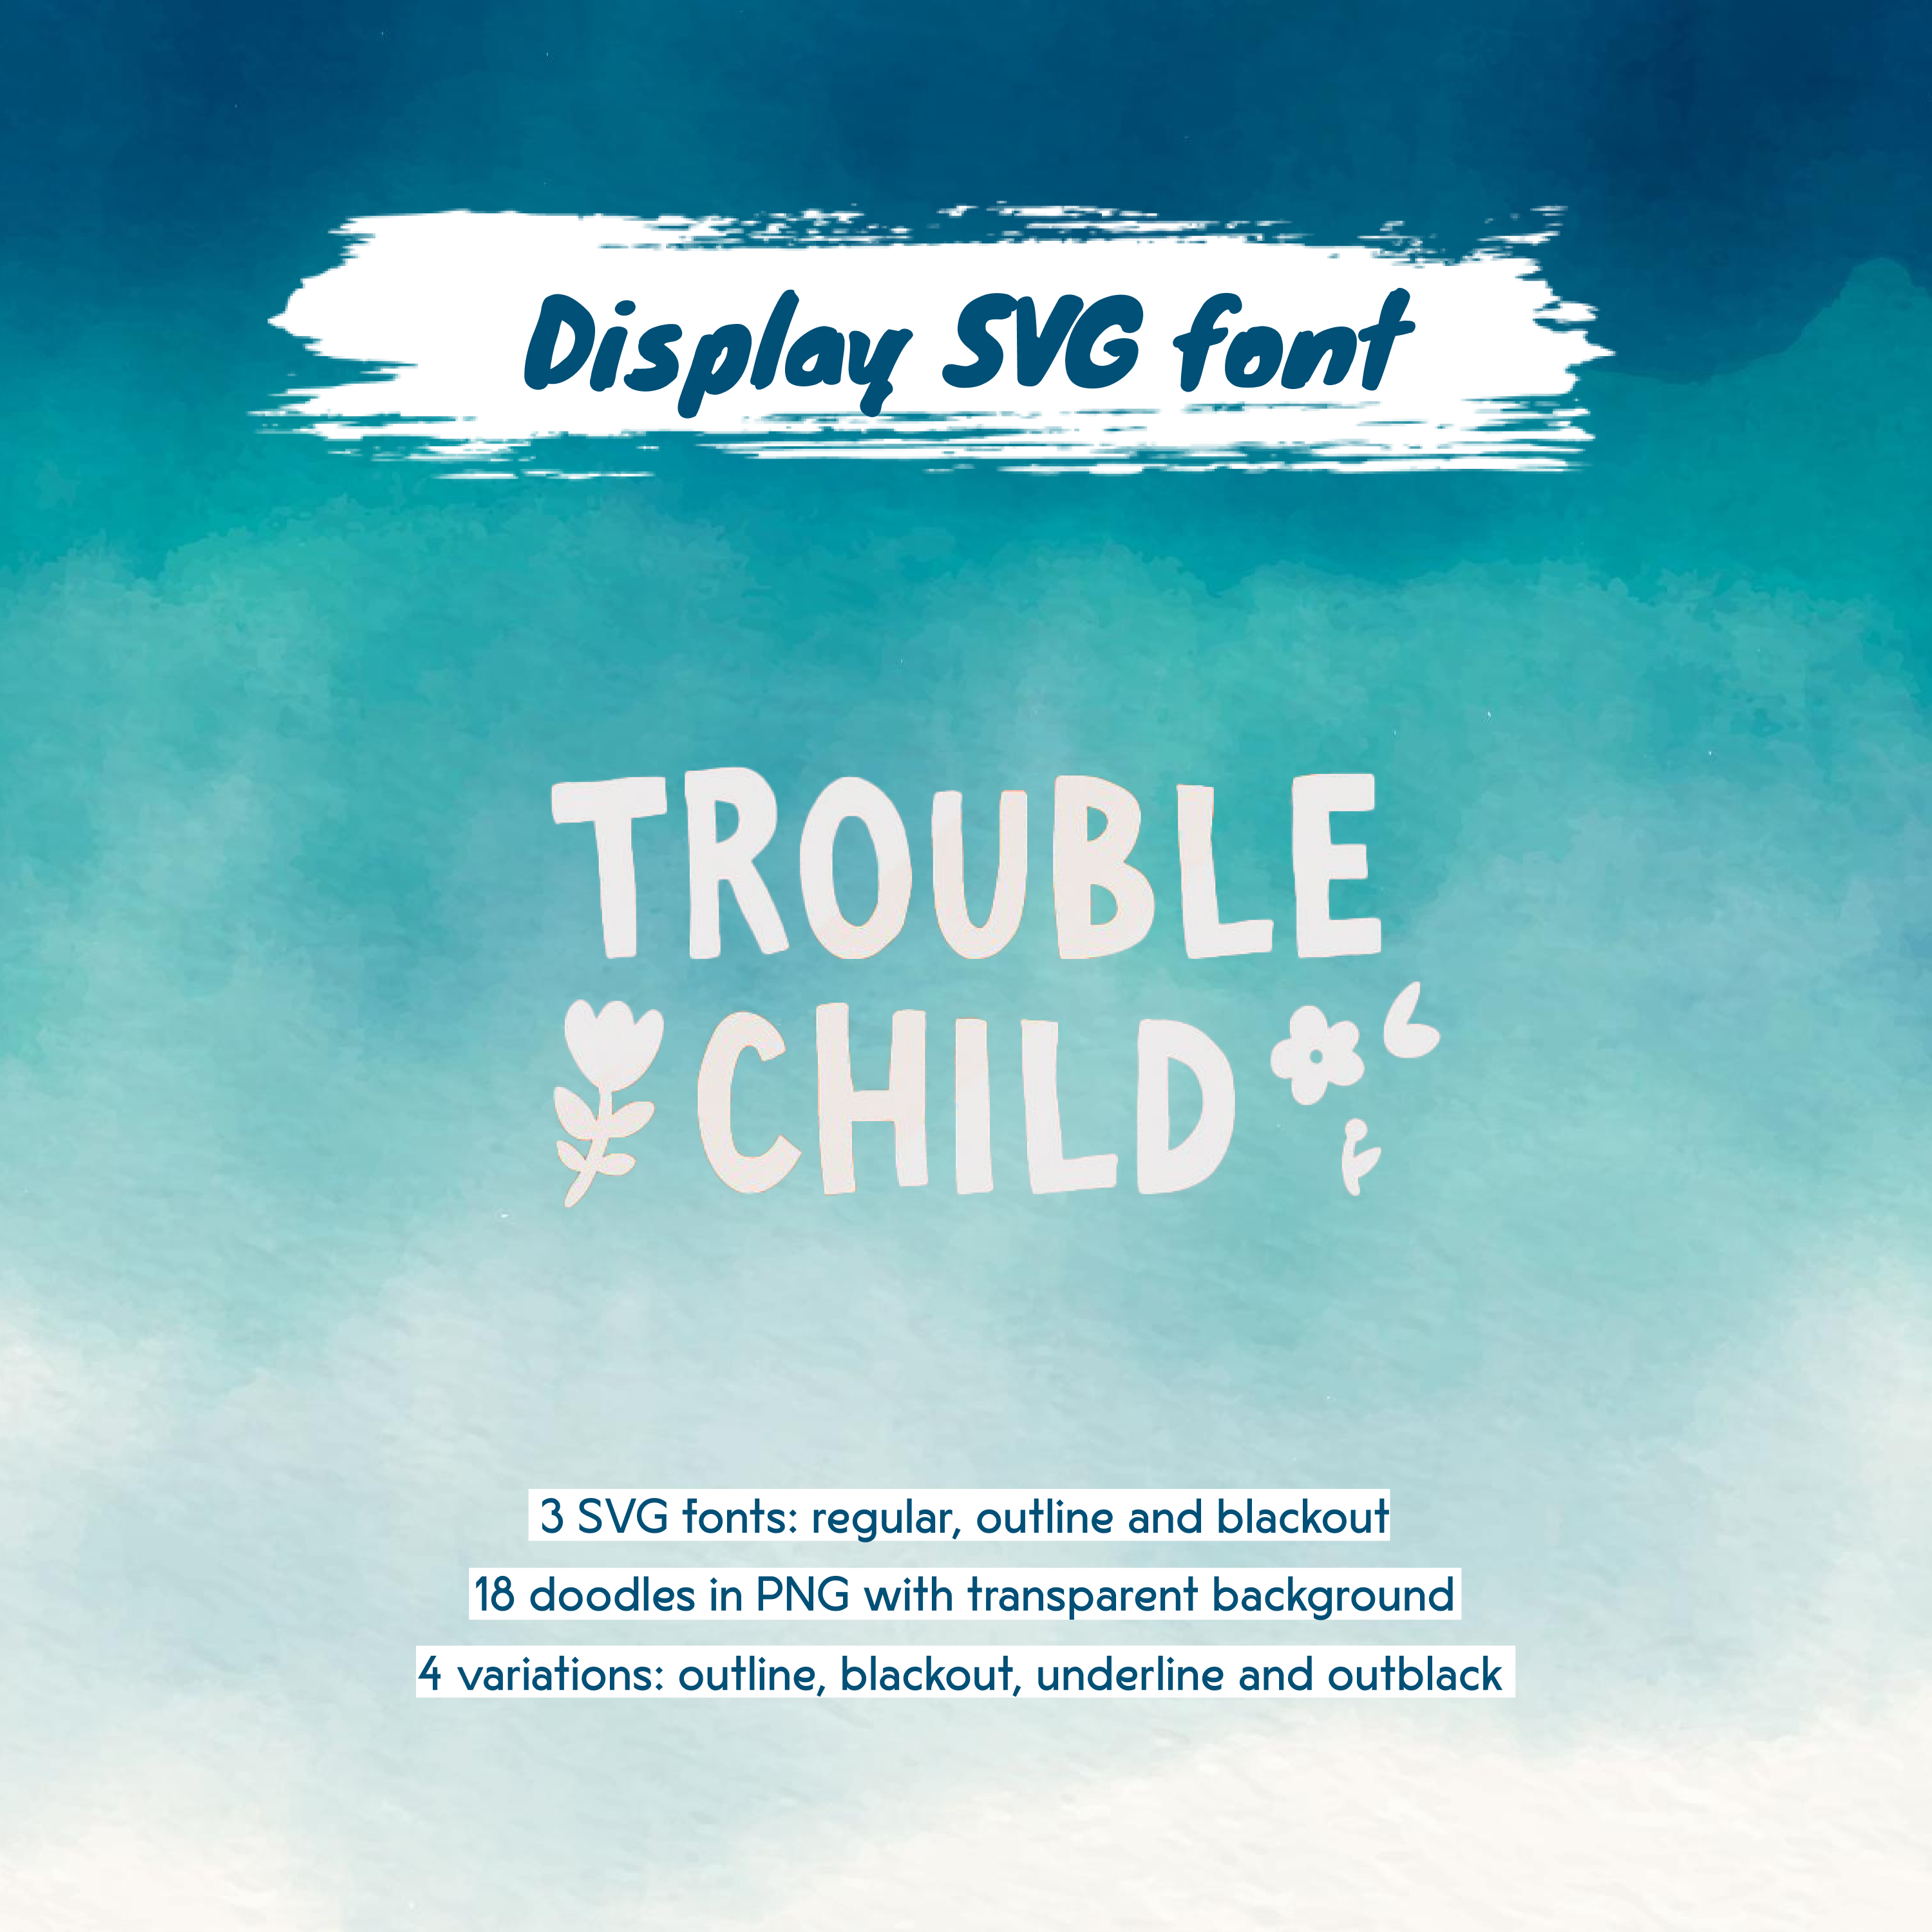 Trouble Child Display SVG Font 1500x1500 1.